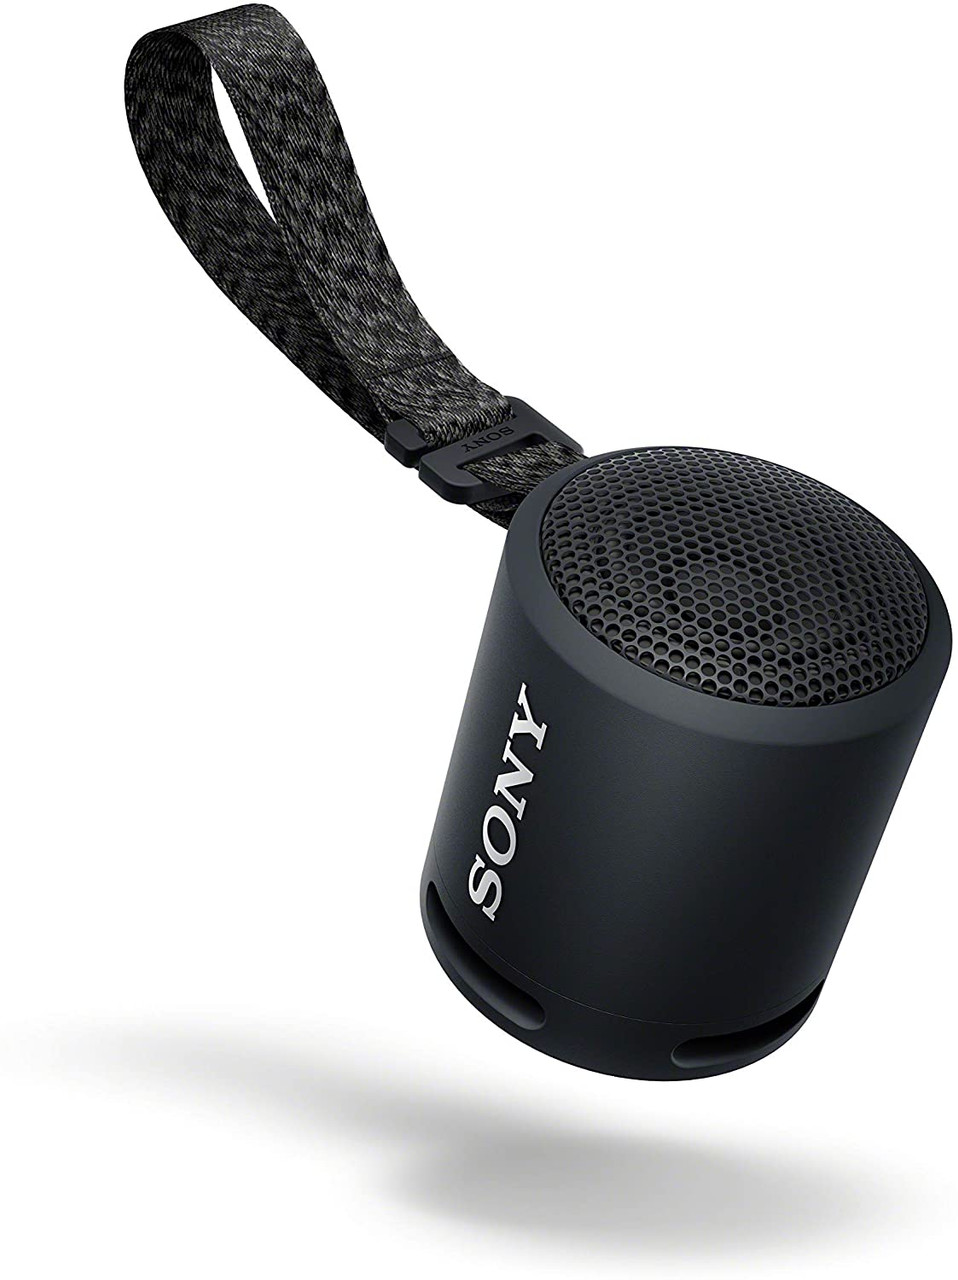 Introducing the Sony SRS-XB13 EXTRA BASS™ Portable Bluetooth® Speaker 